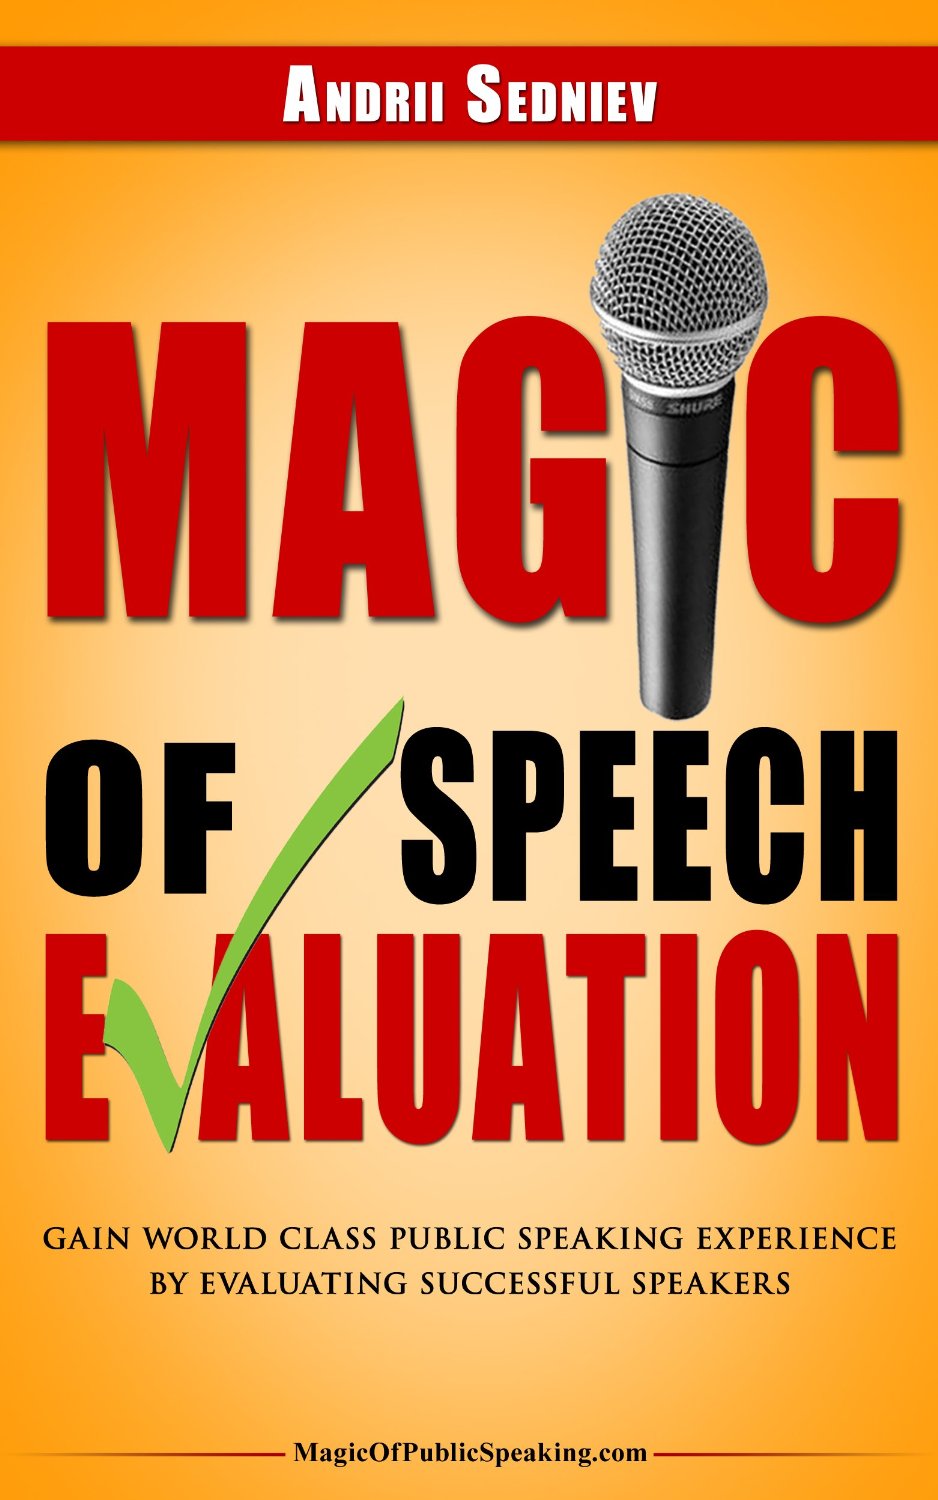 Magic of Speech Evaluation by Andrii Sedniev